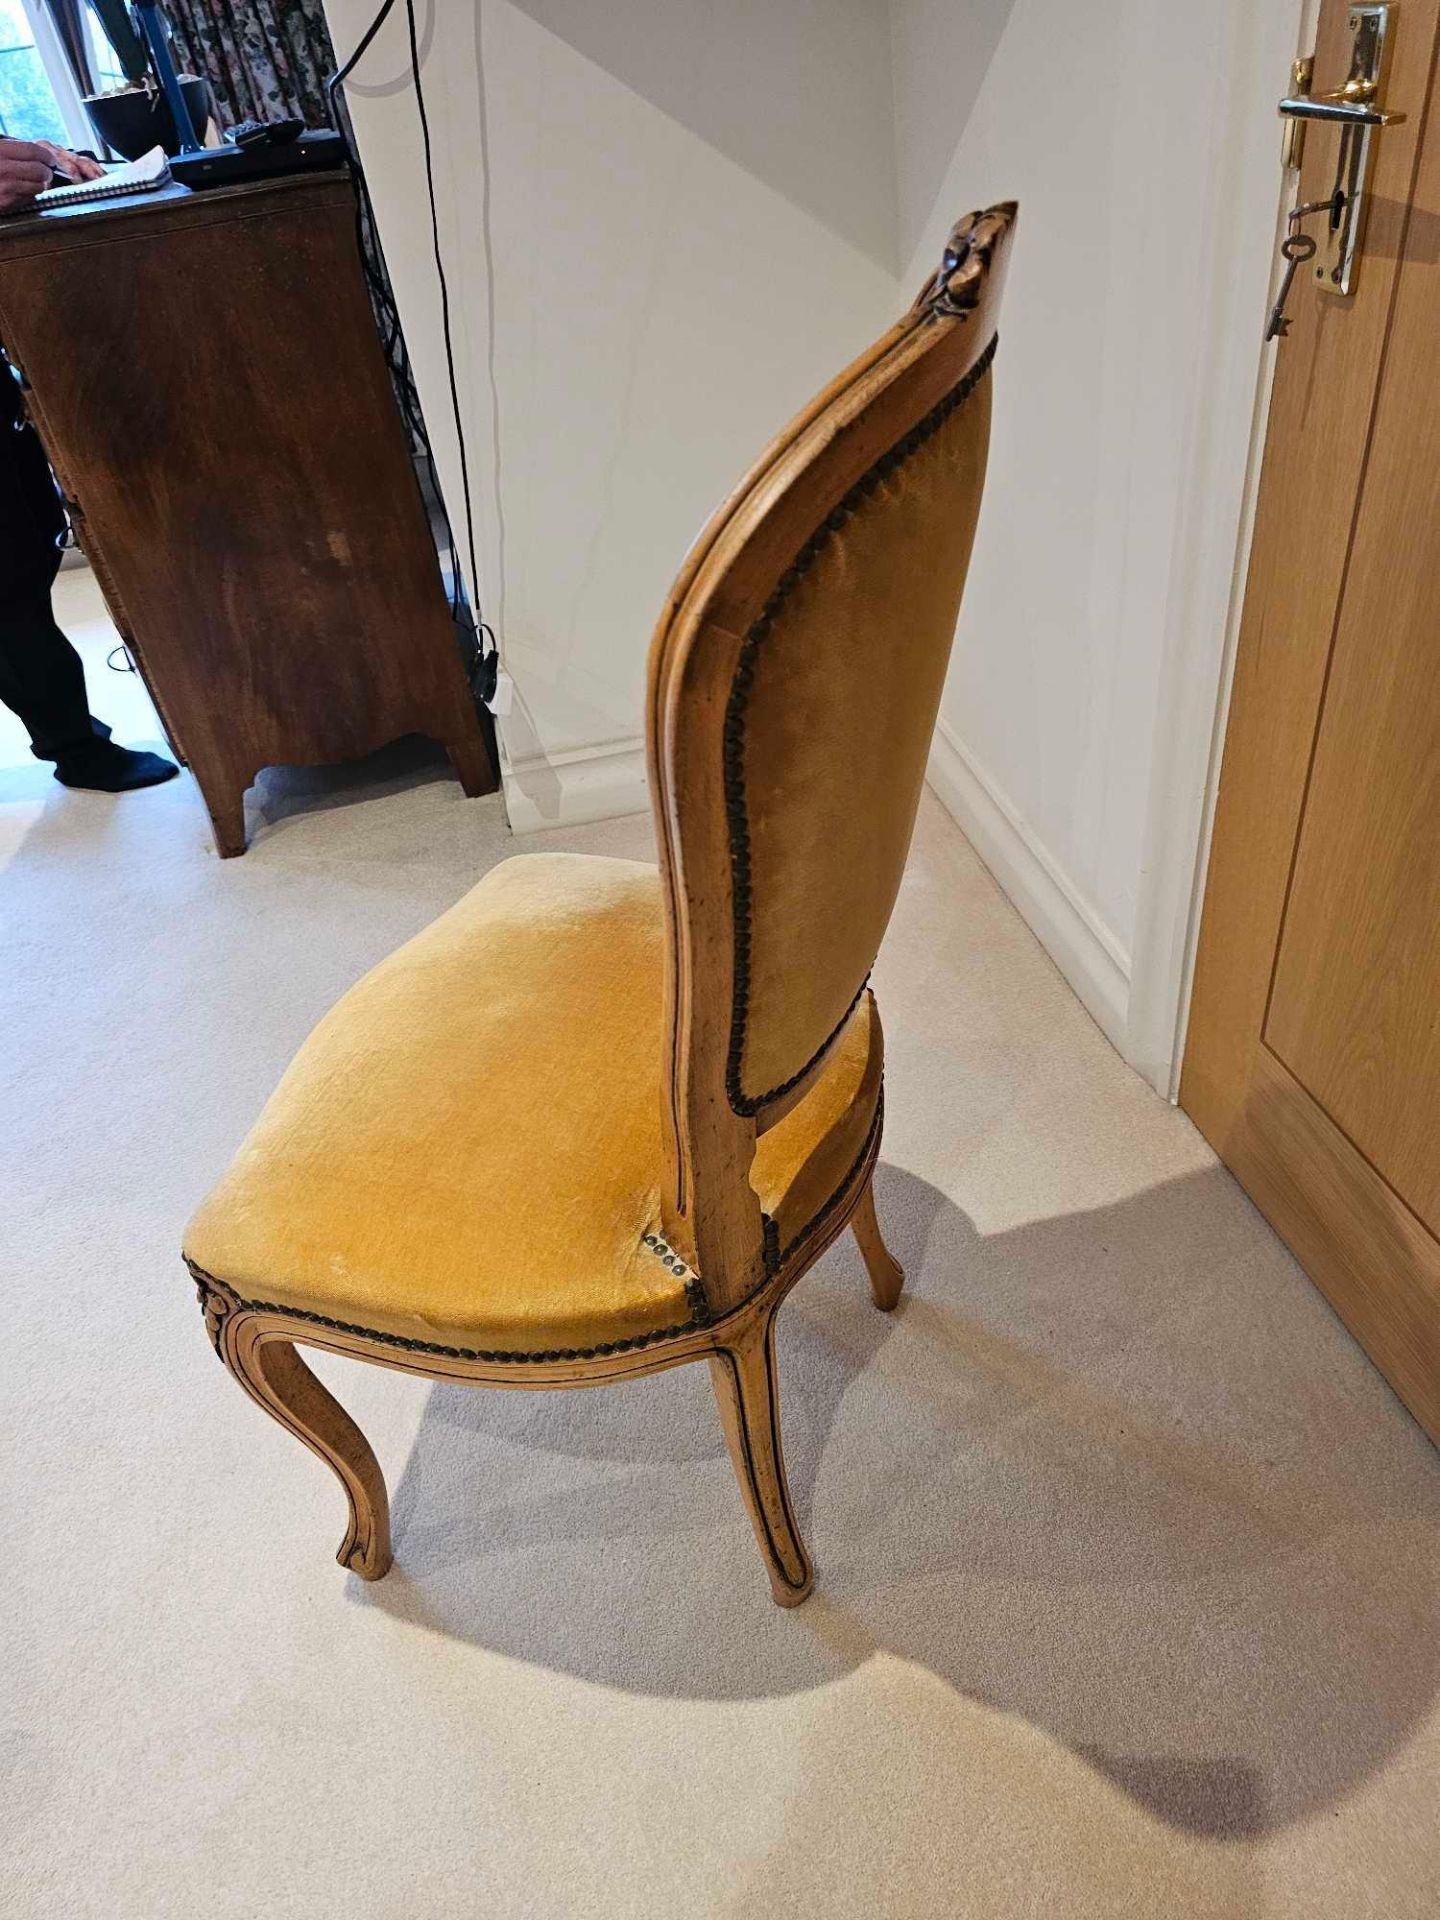 French Beechwood Side Chair, Louis XV Style, The Shaped Rectangular Back With Floral Cresting, - Image 4 of 5